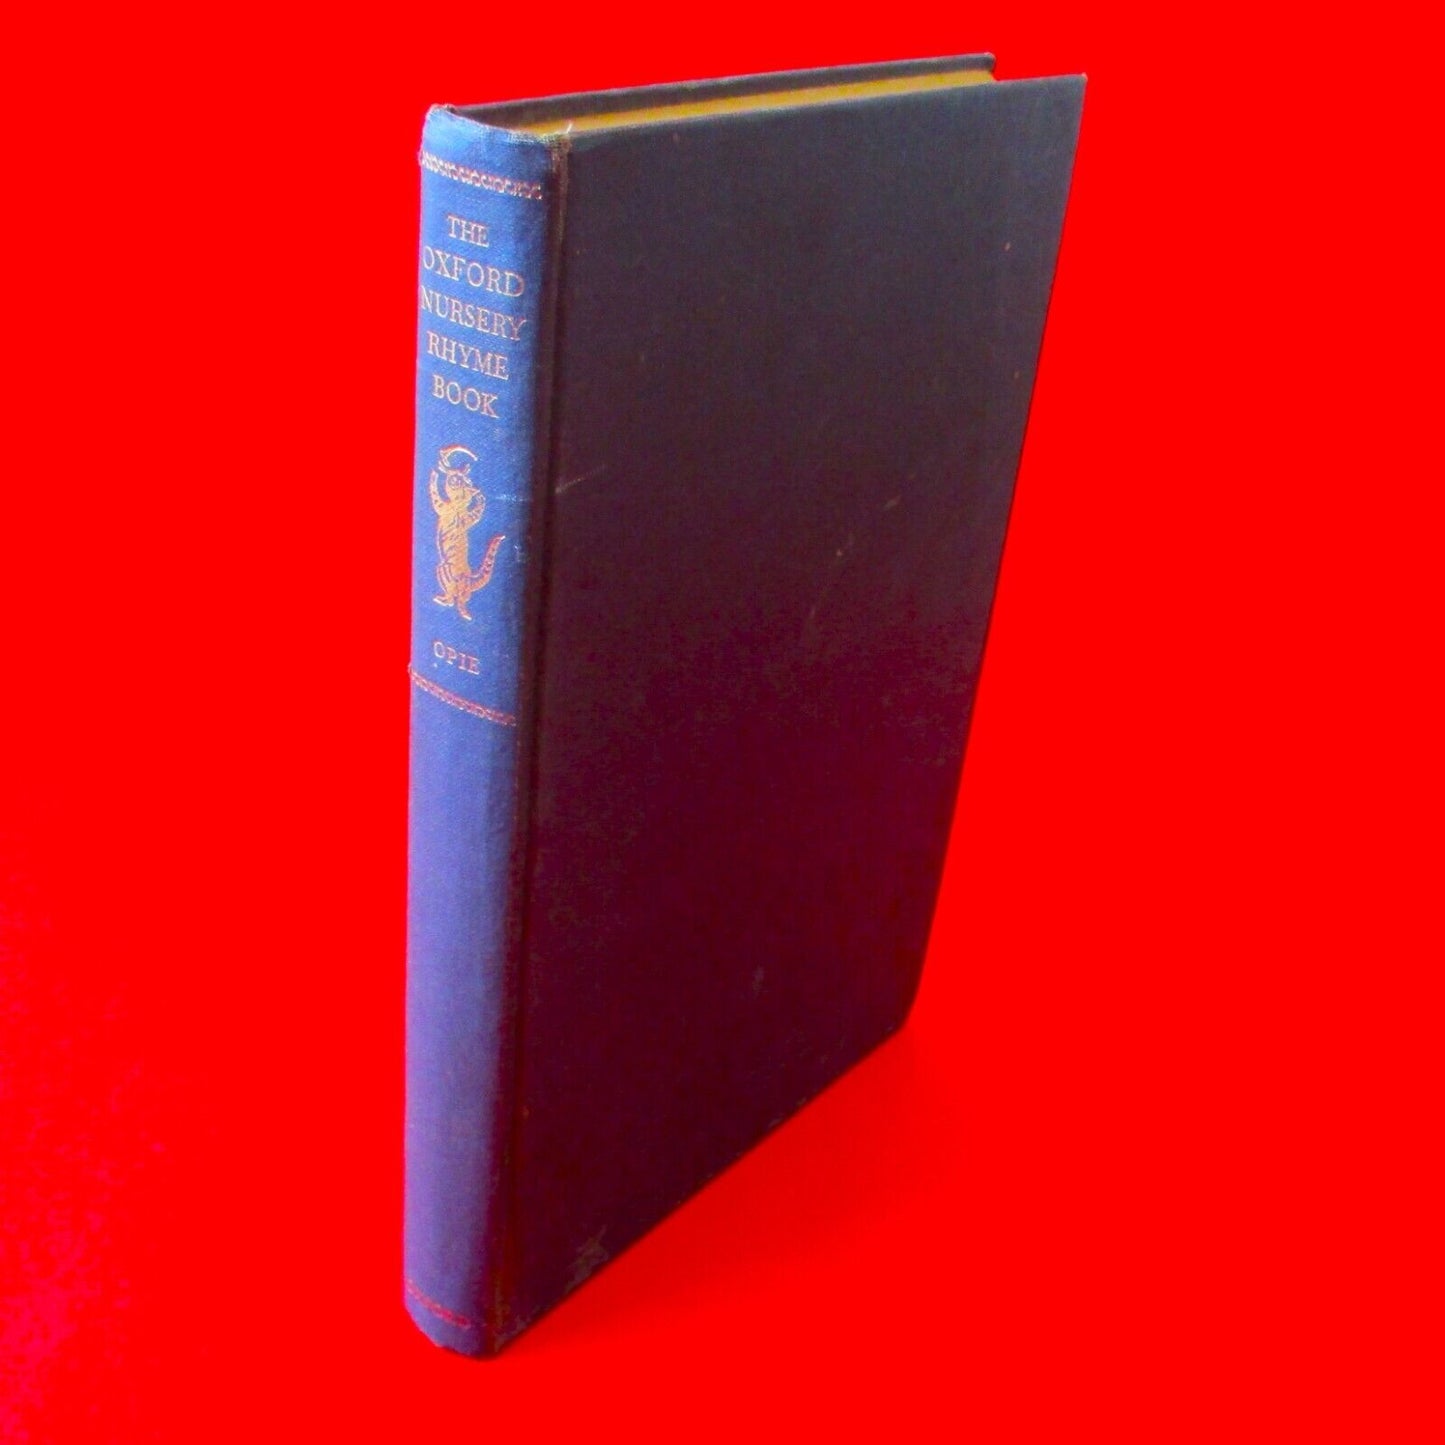 The Oxford Nursery Rhyme Book by Iona and Peter Opie 1960 Hardcover